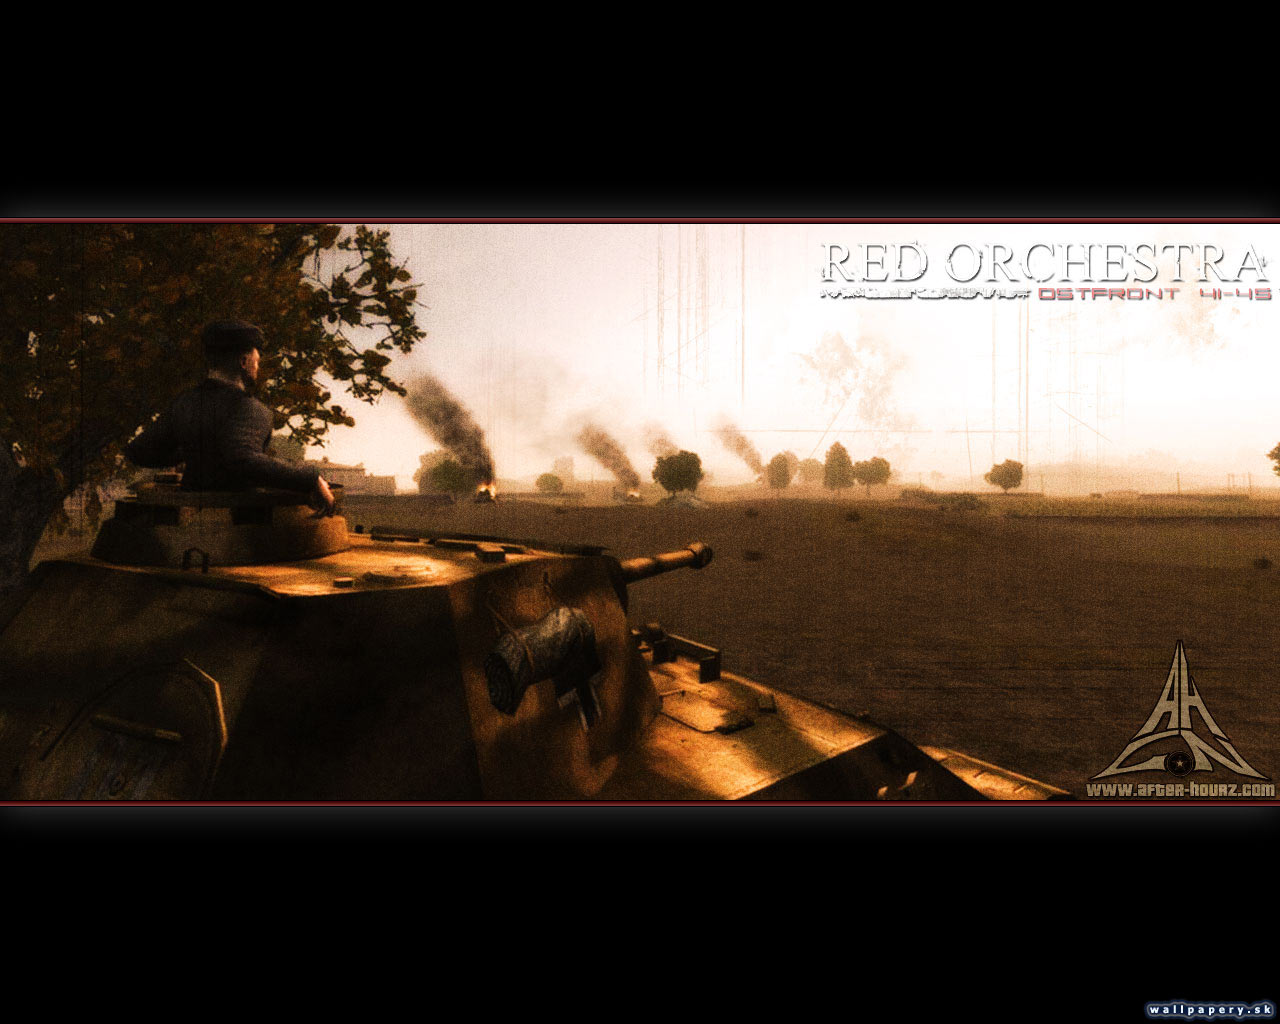 Red Orchestra: Ostfront 41-45 - wallpaper 14